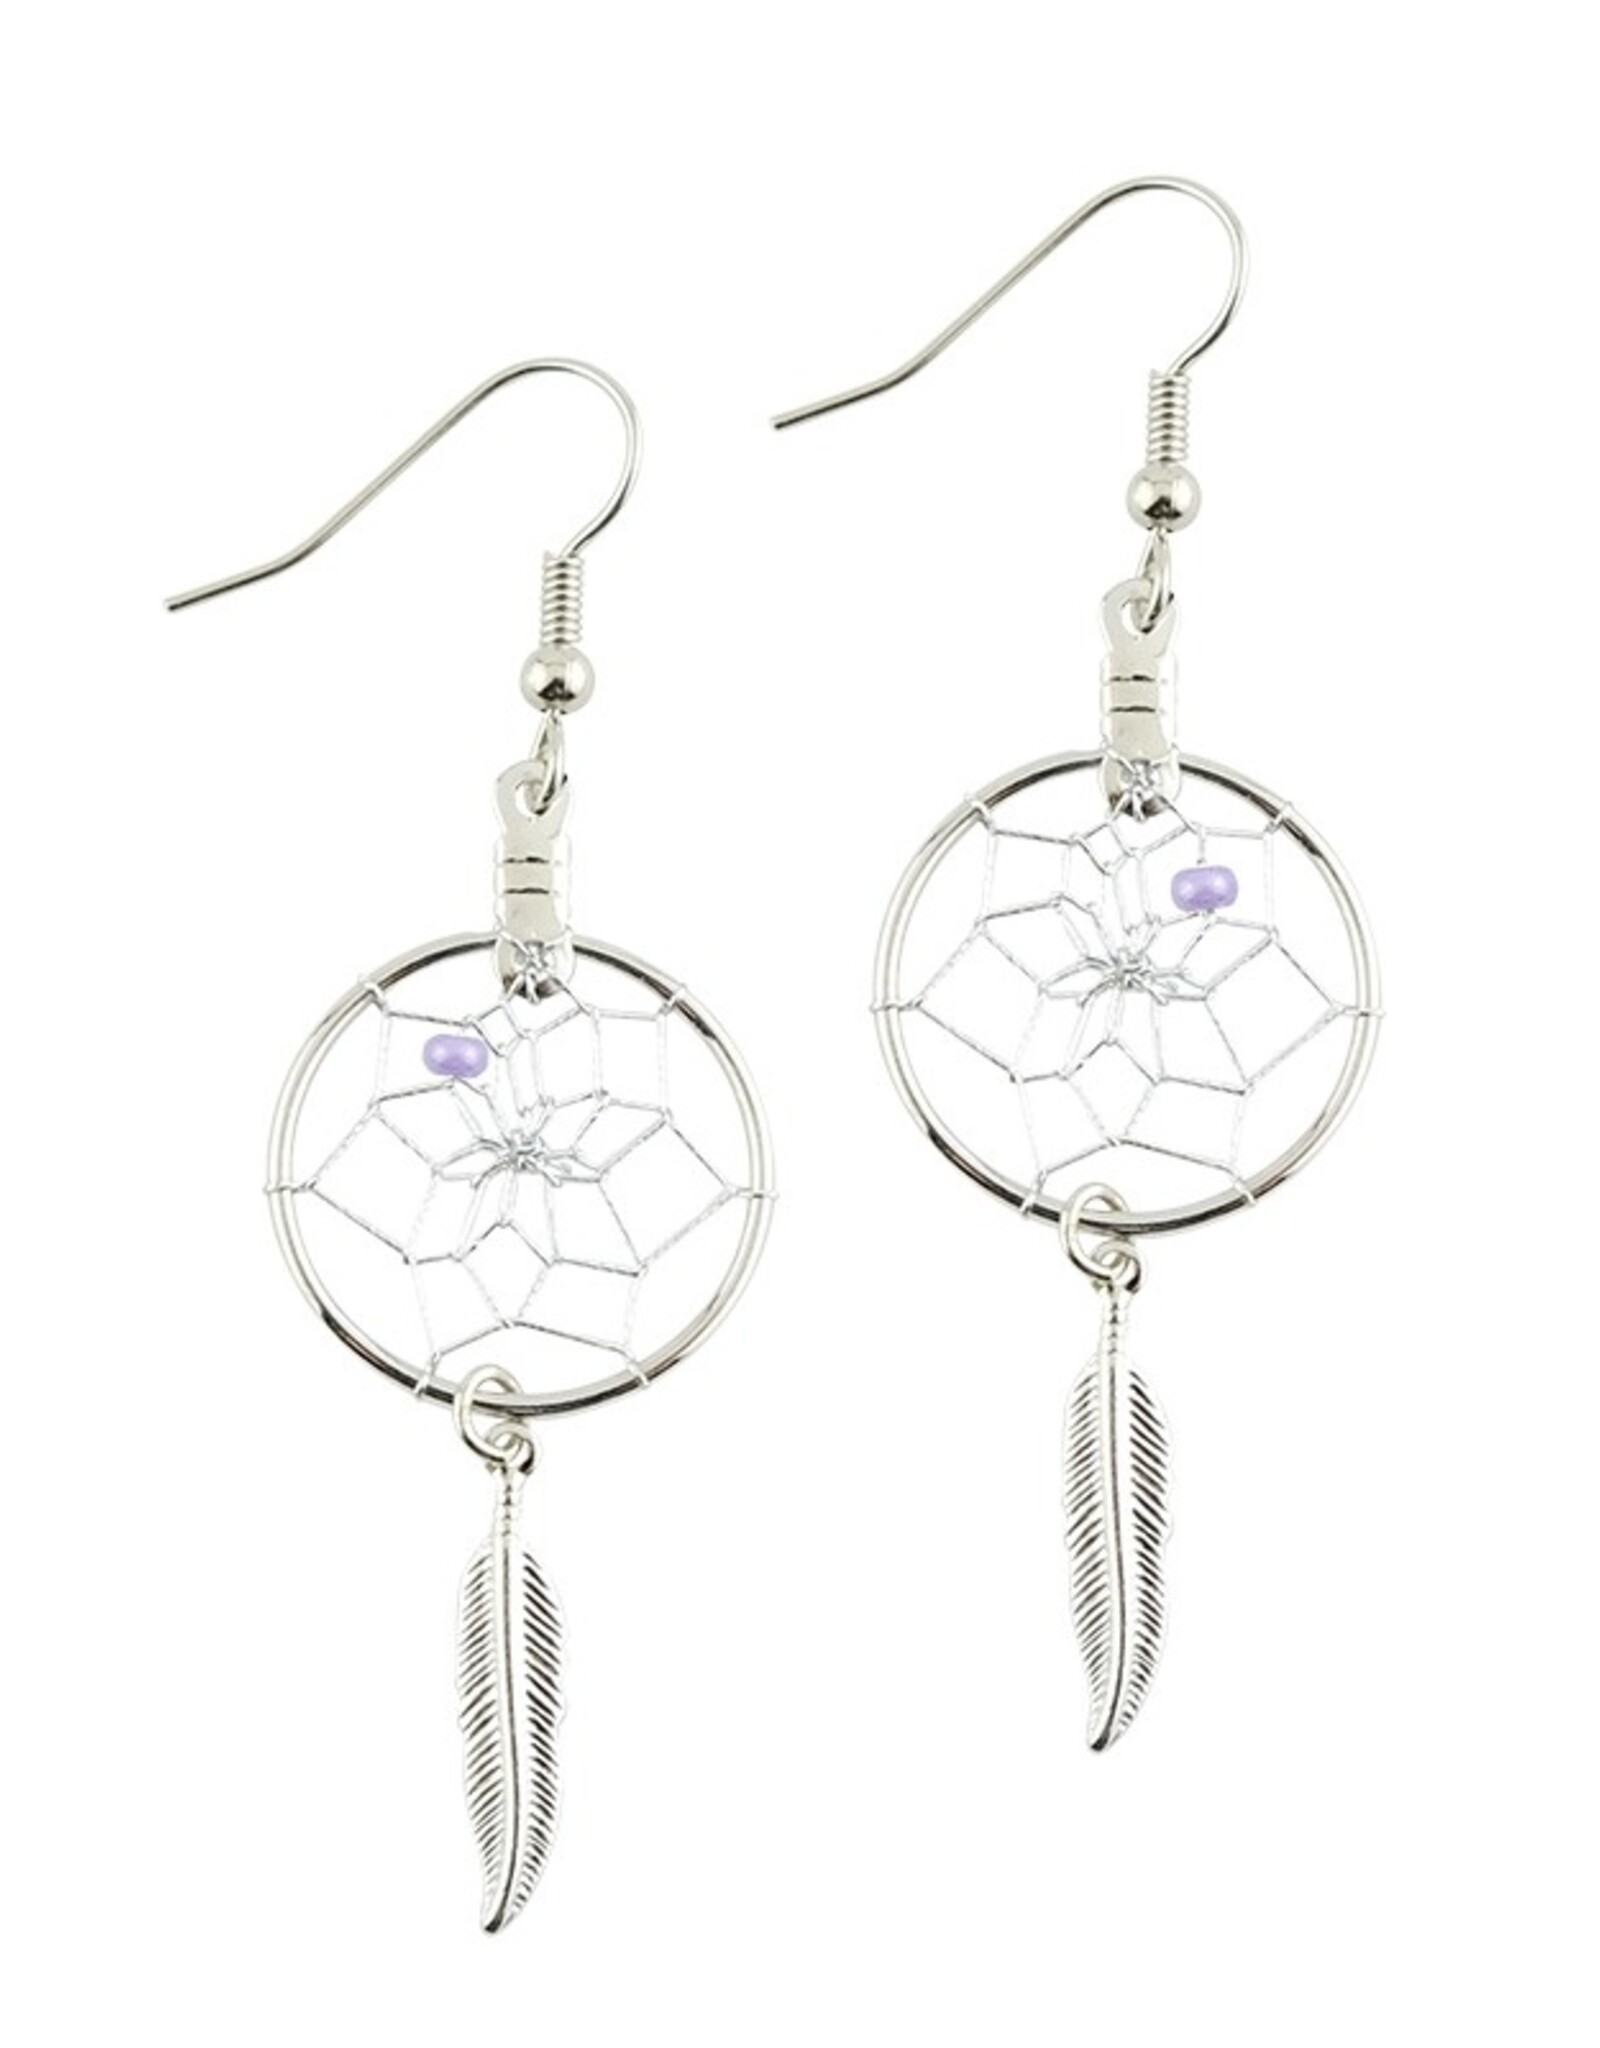 Dreamcather Earrings - DC15